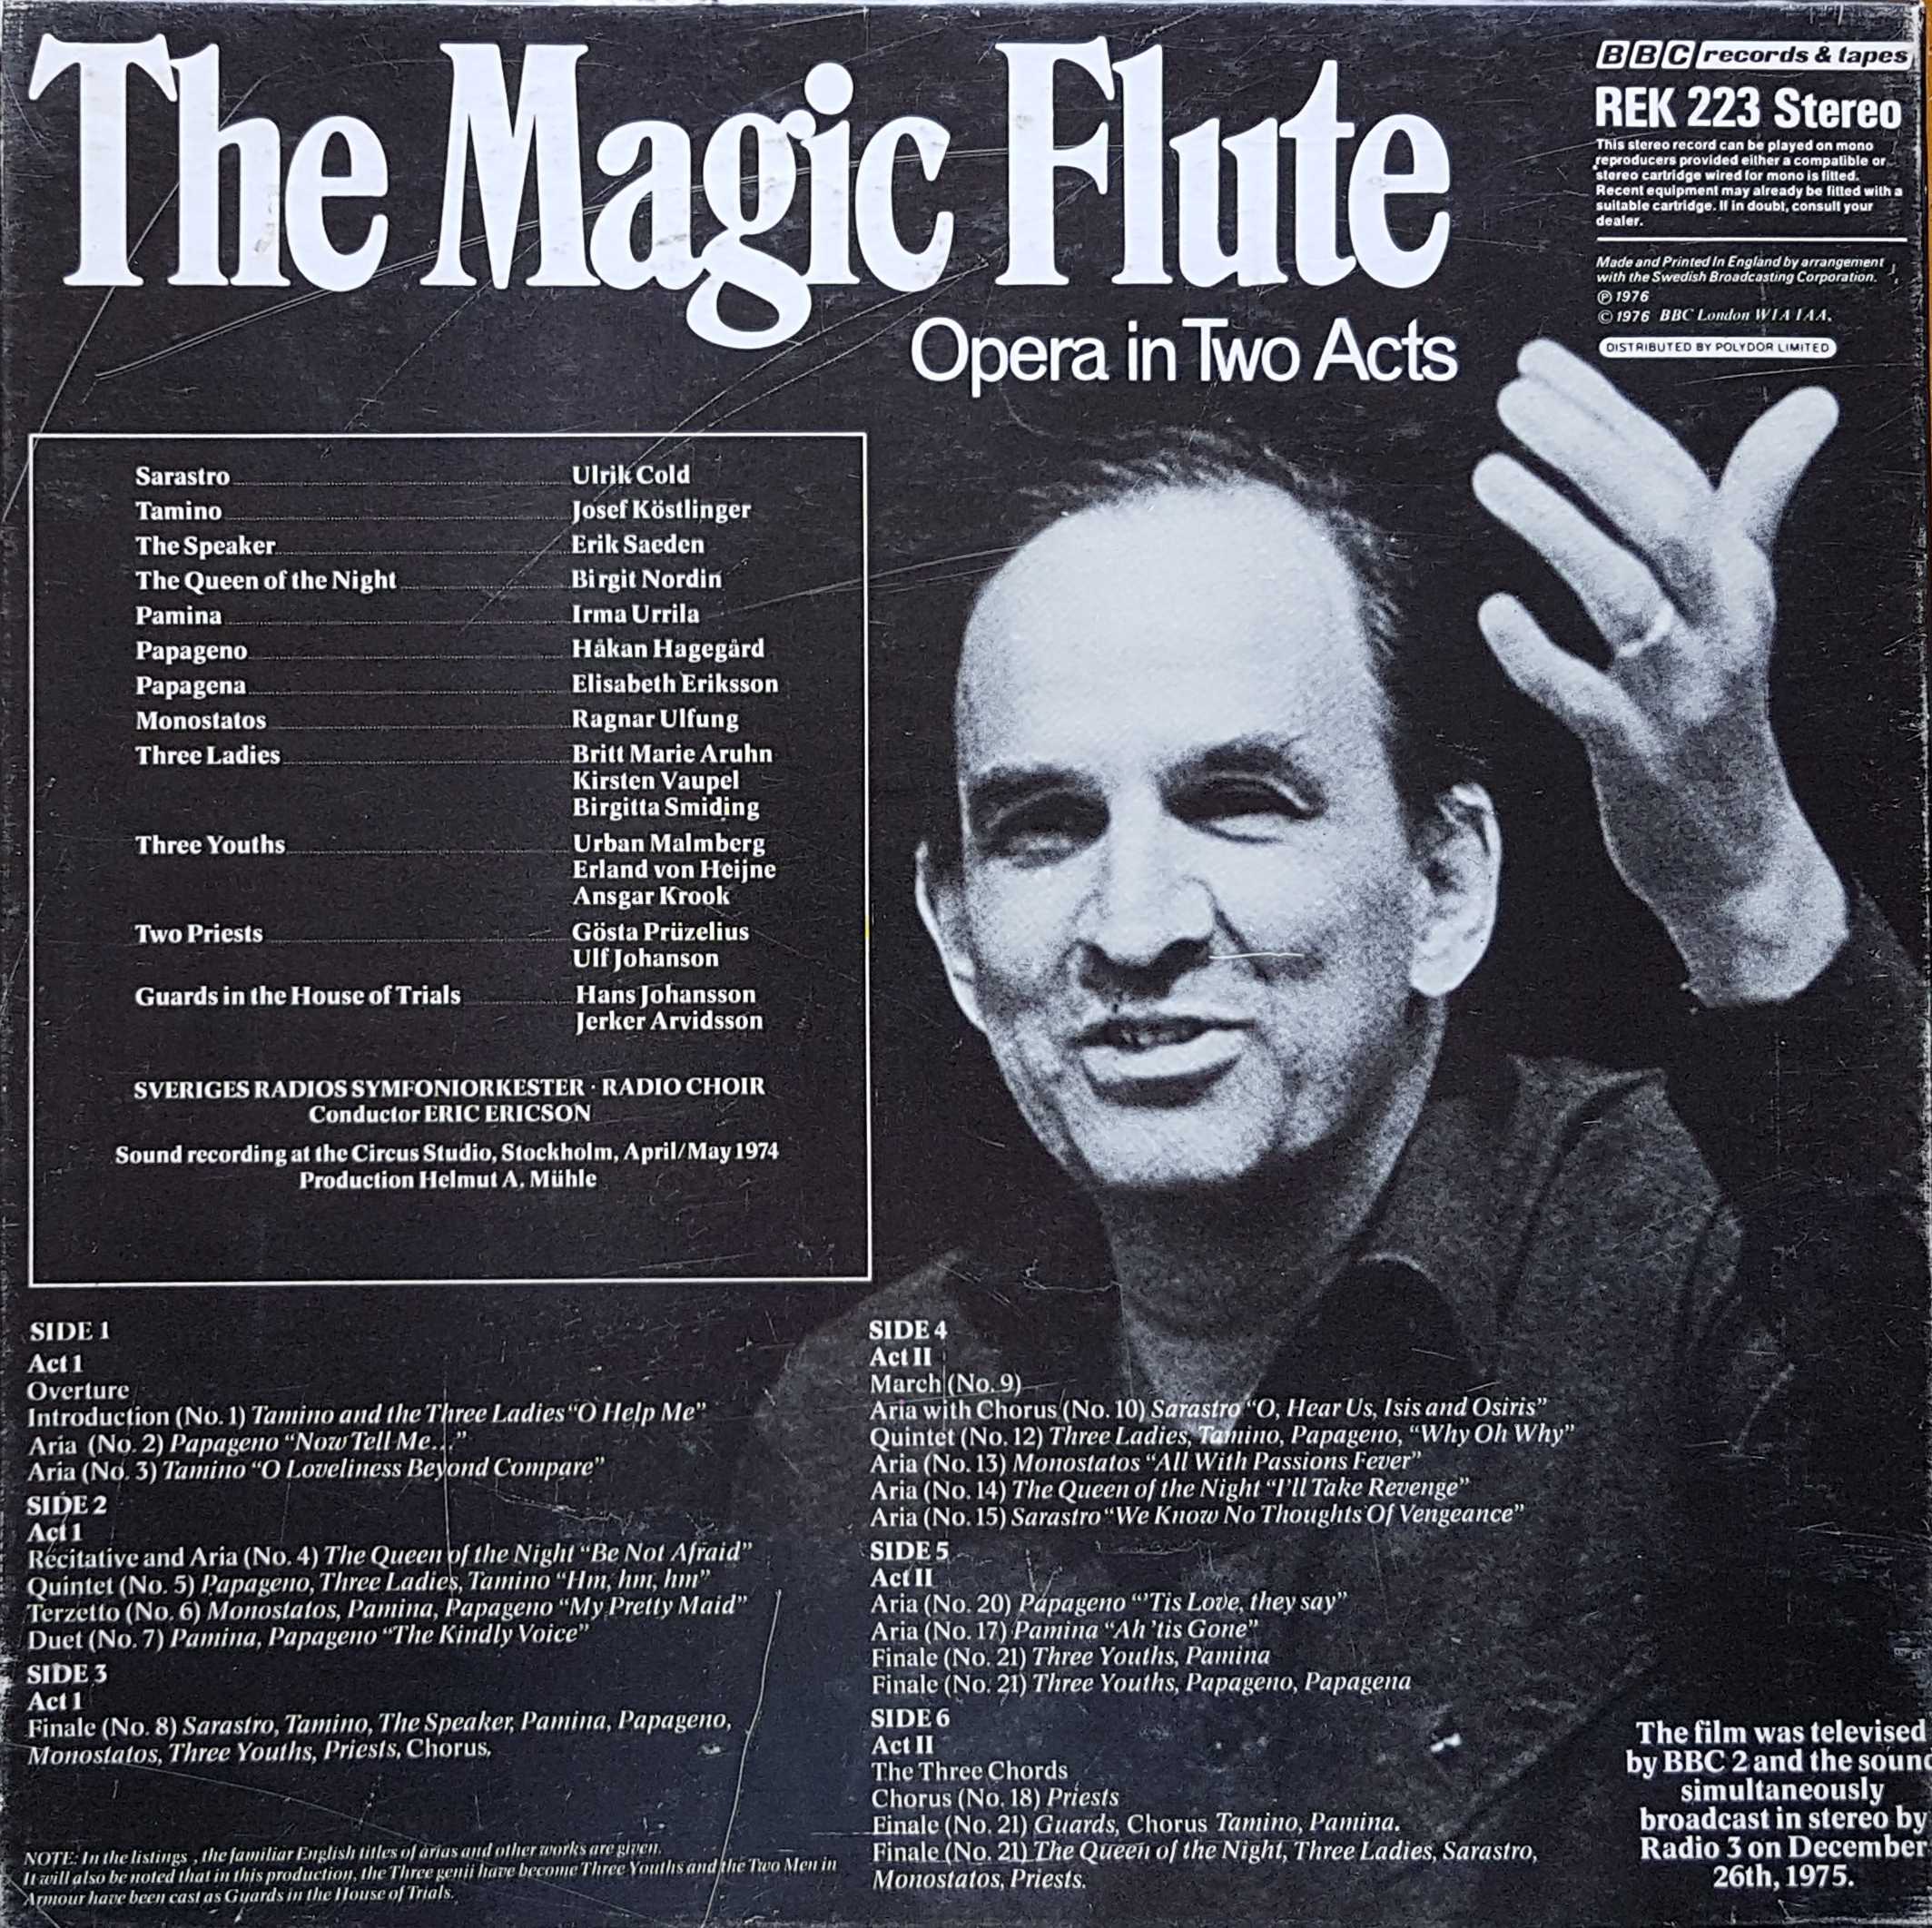 Picture of REK 223 The magic flute by artist Wolfgang Amadeus Mozart / Sveriges Radios Symfoniorkester, Radiokren from the BBC records and Tapes library